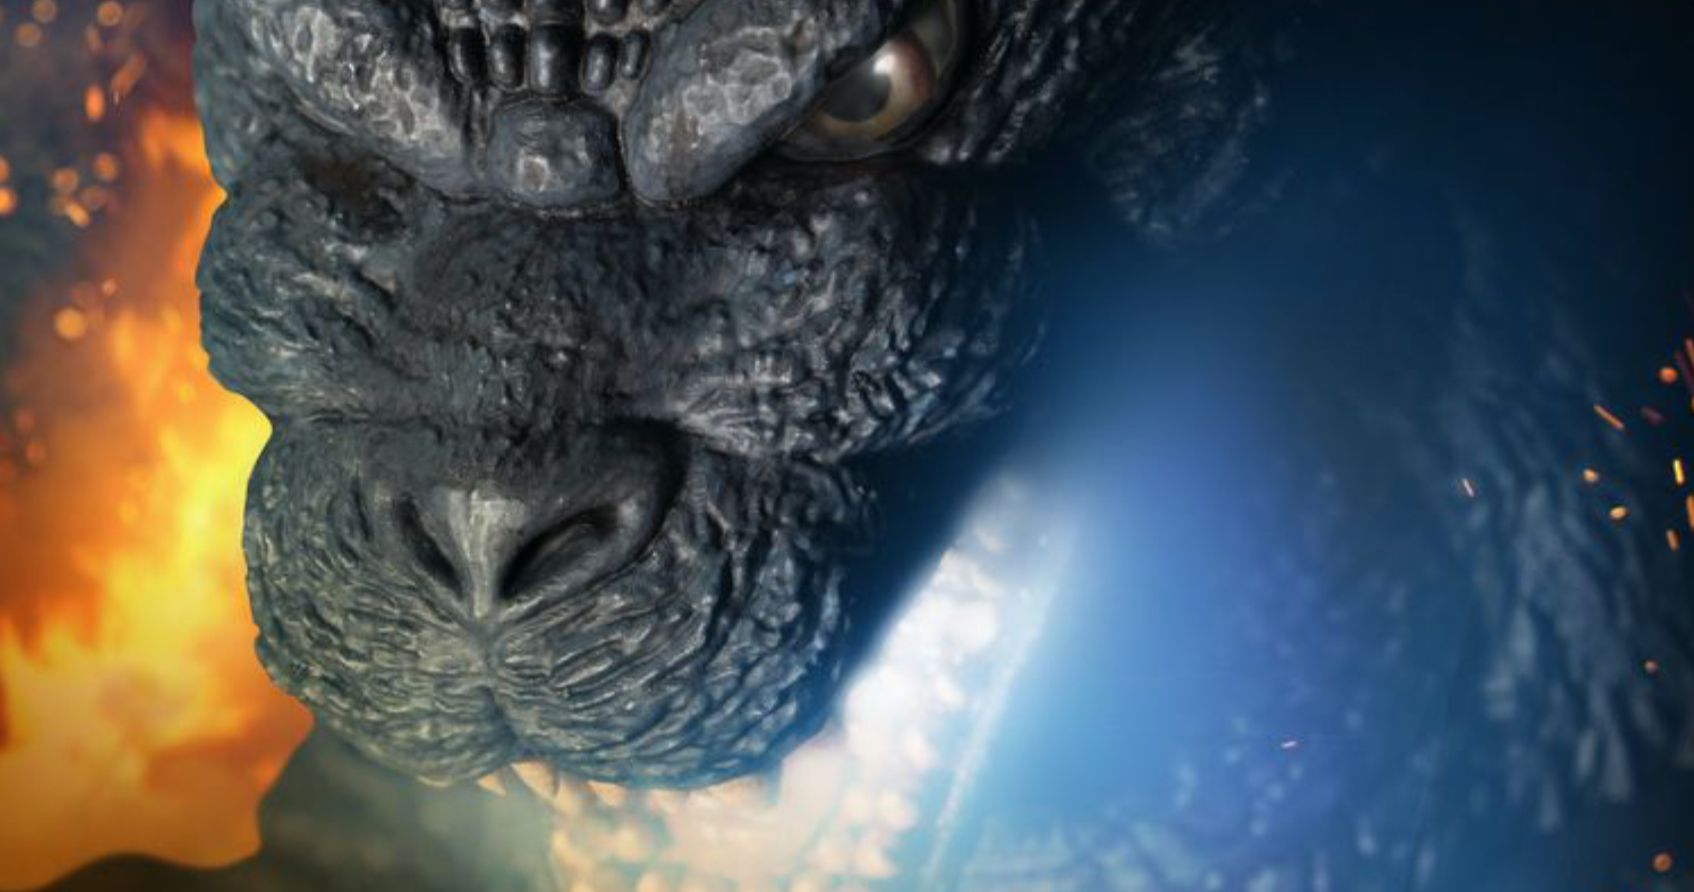 Mezco Unleashes Ultimate Godzilla Figure That Stretches 3-Feet from 'Teeth to Tail'